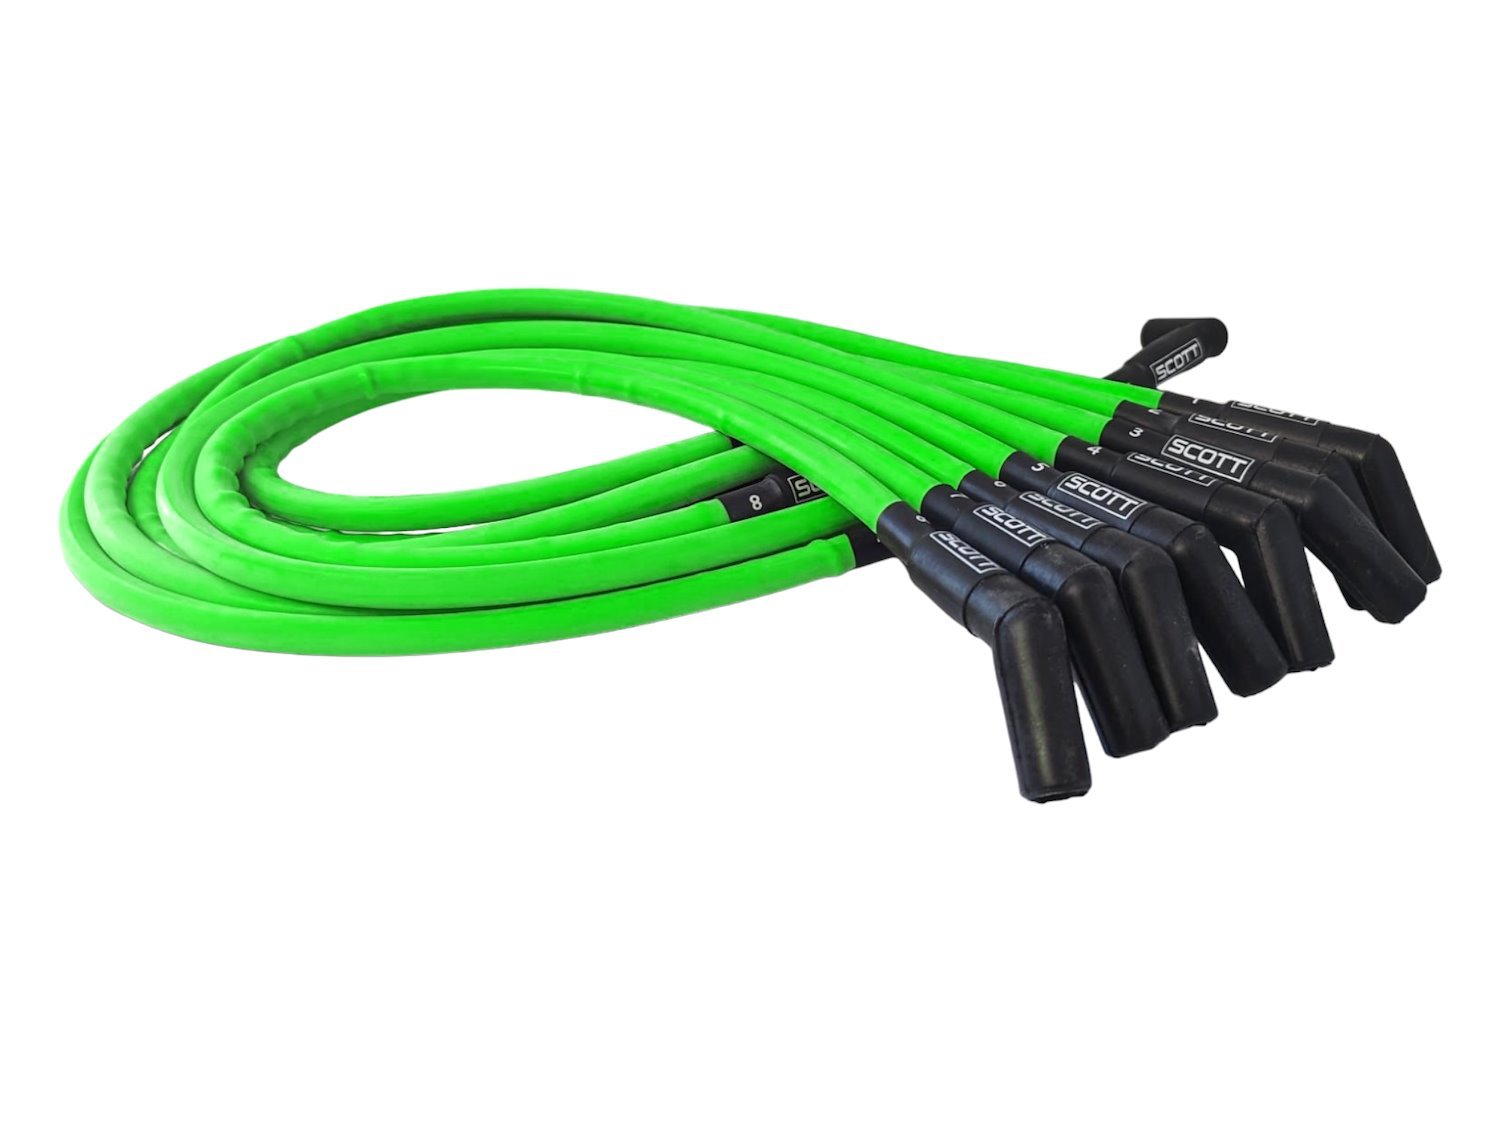 SPW300-CH-415-8 Super Mag Fiberglass-Oversleeved Spark Plug Wire Set for Big Block Chevy, Over Valve Cover [Green]